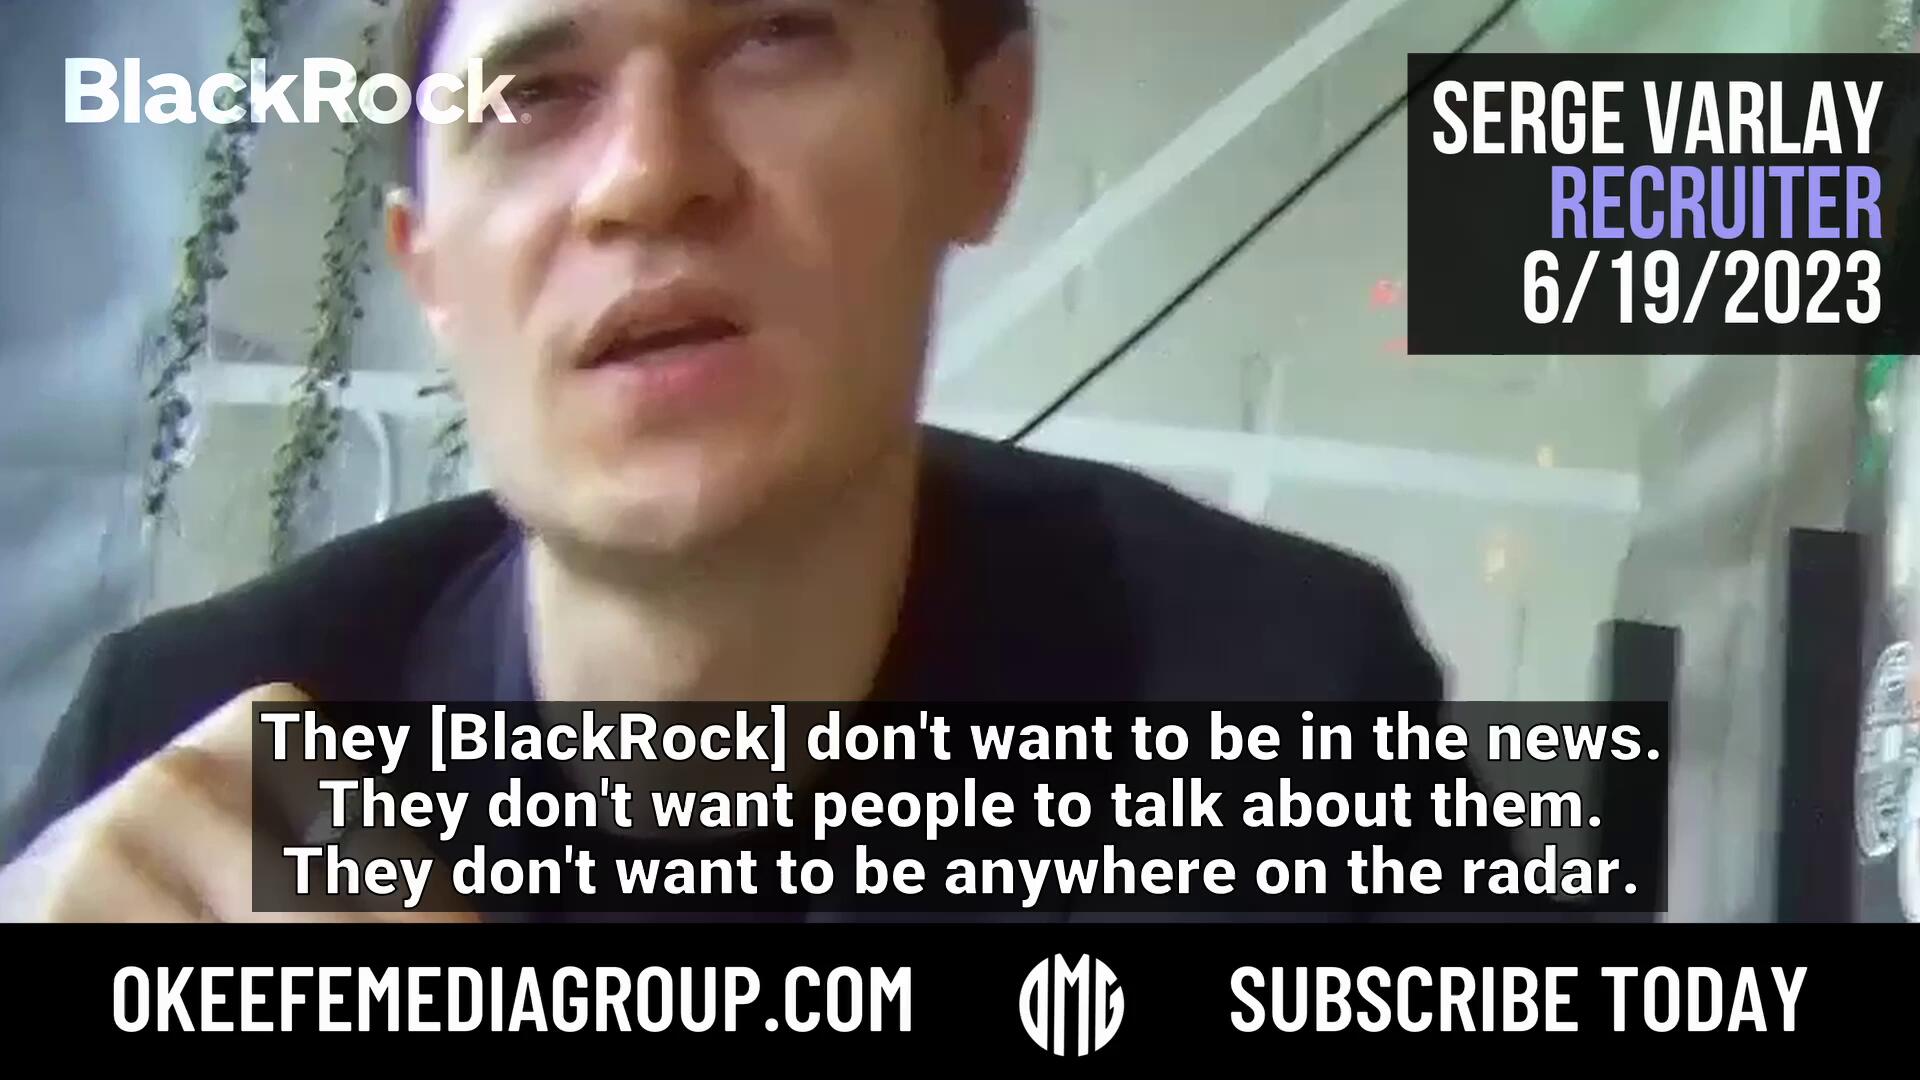 OMG Undercover: BlackRock Recruiter Who ‘Decides People’s Fate’ Says ‘War Is Good For Business’ While Spilling Info On Asset Giant